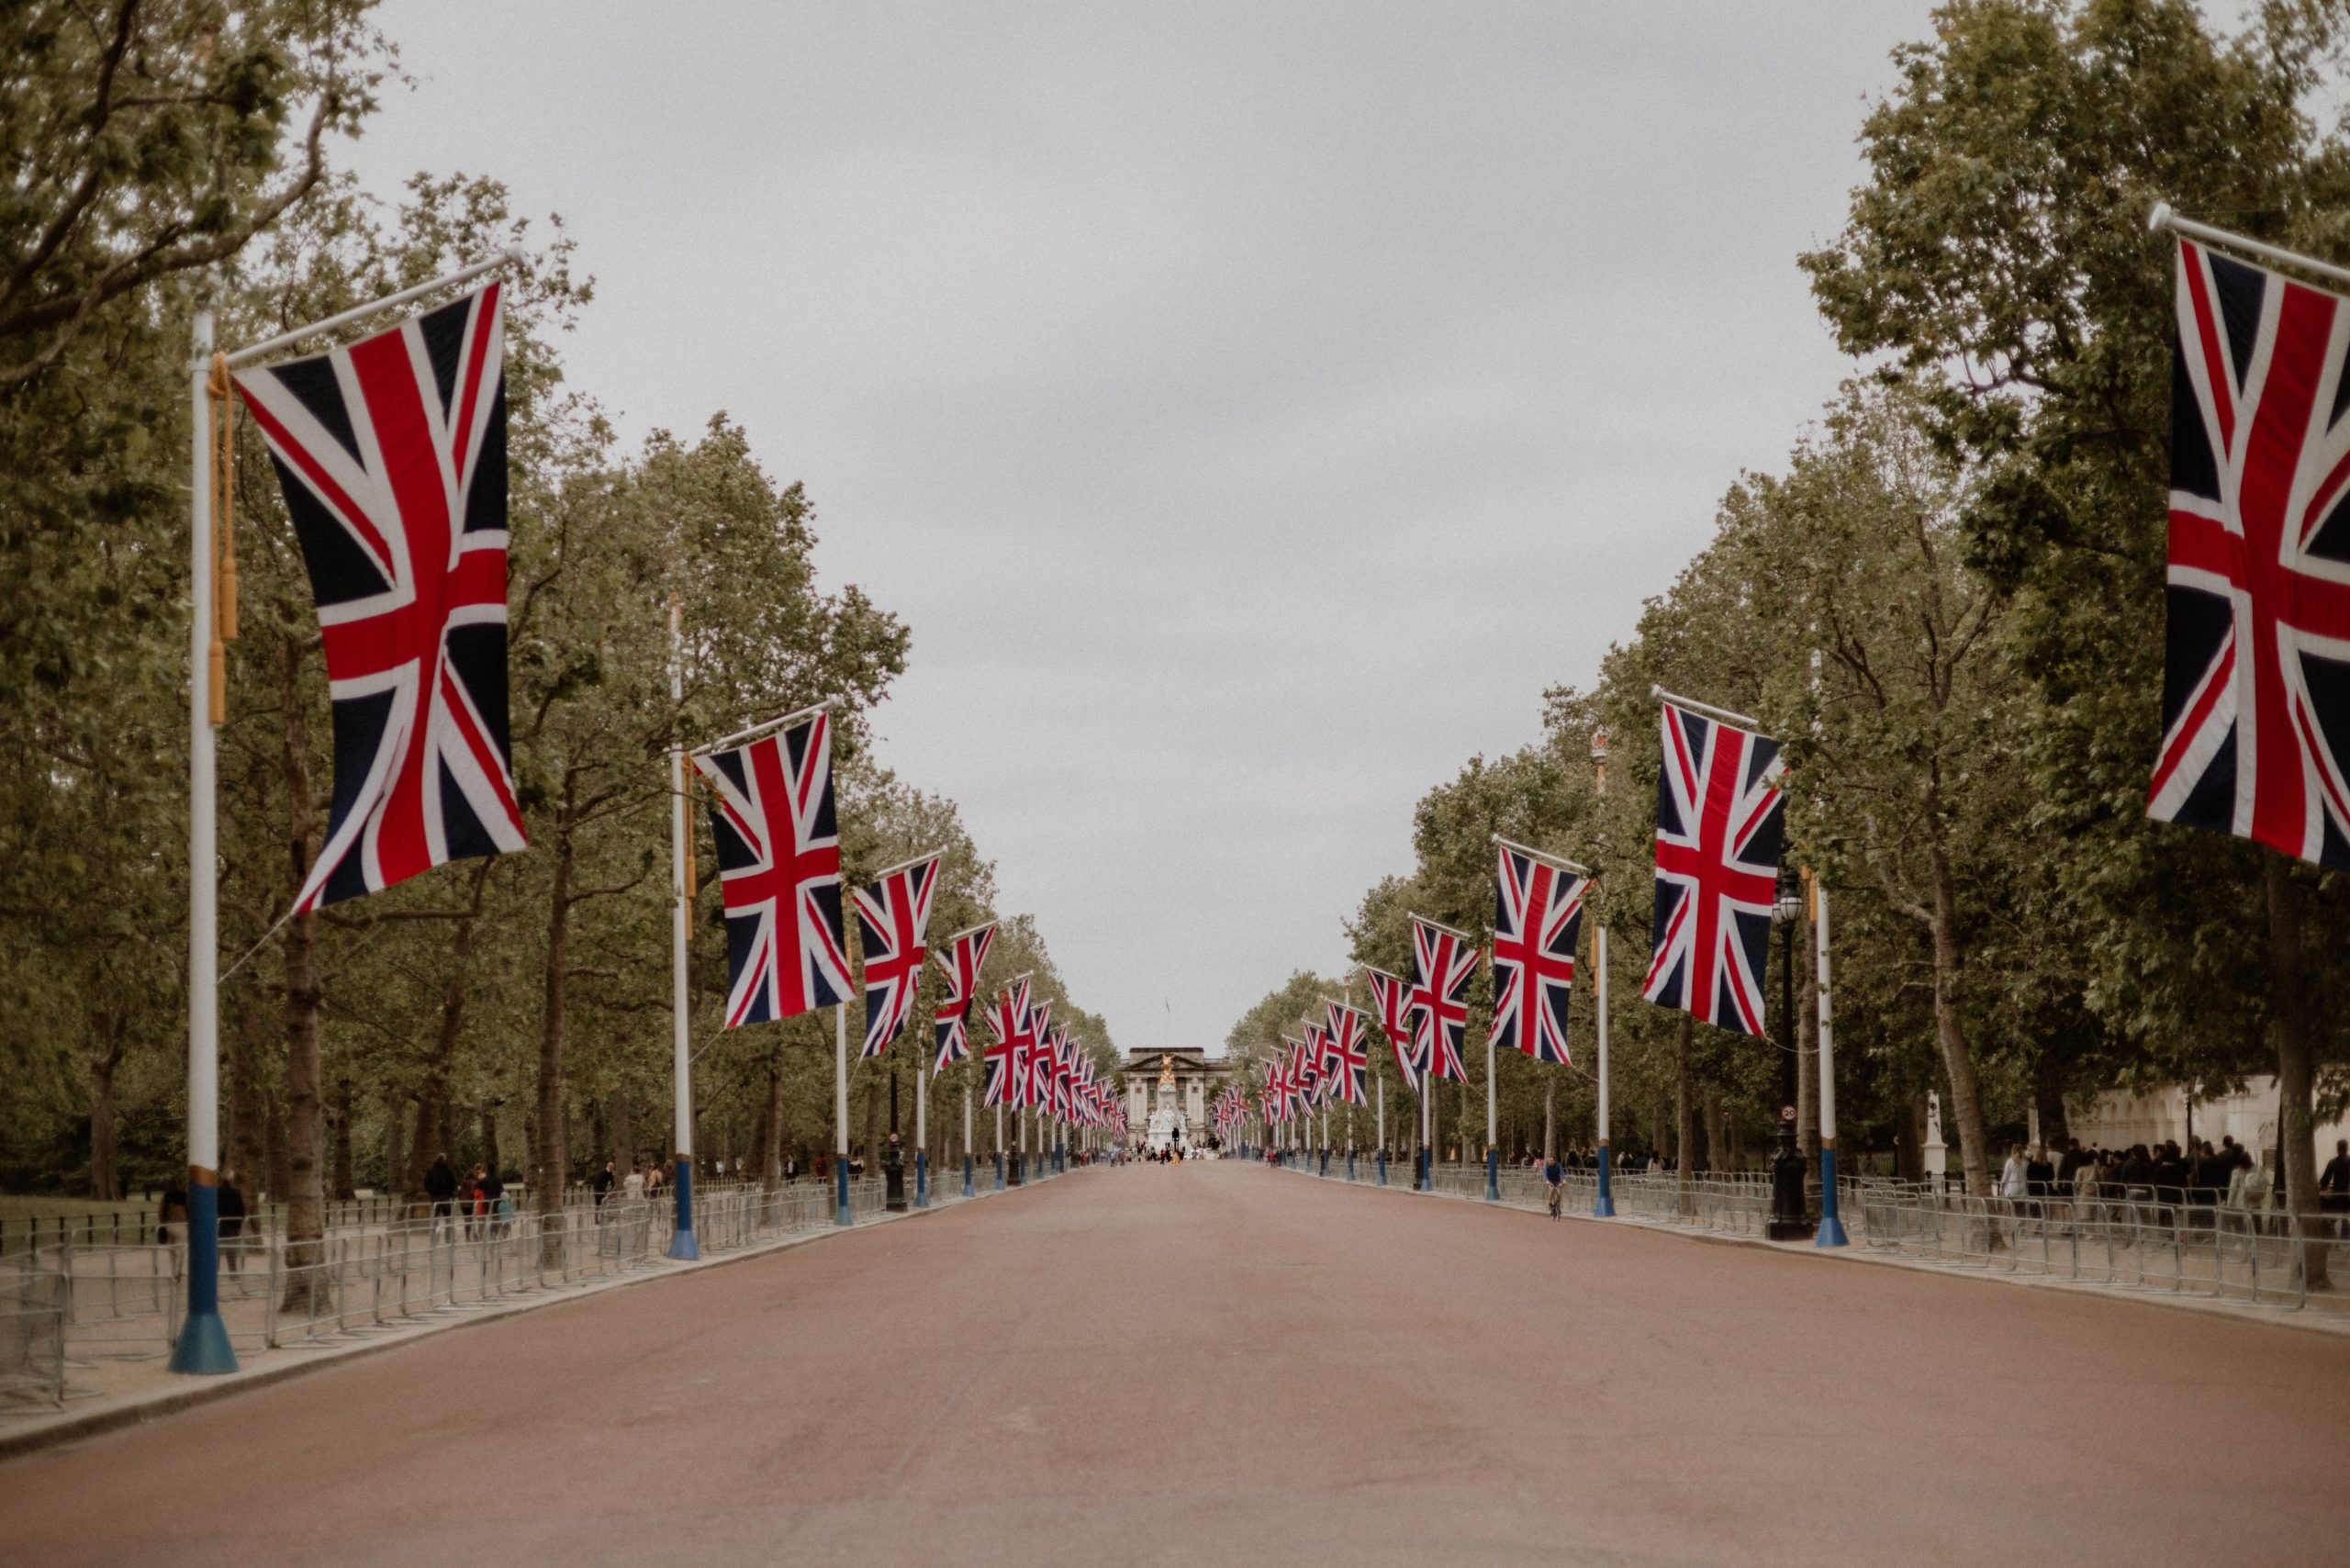 The road to Buckingham Palace lined with British flags and trees